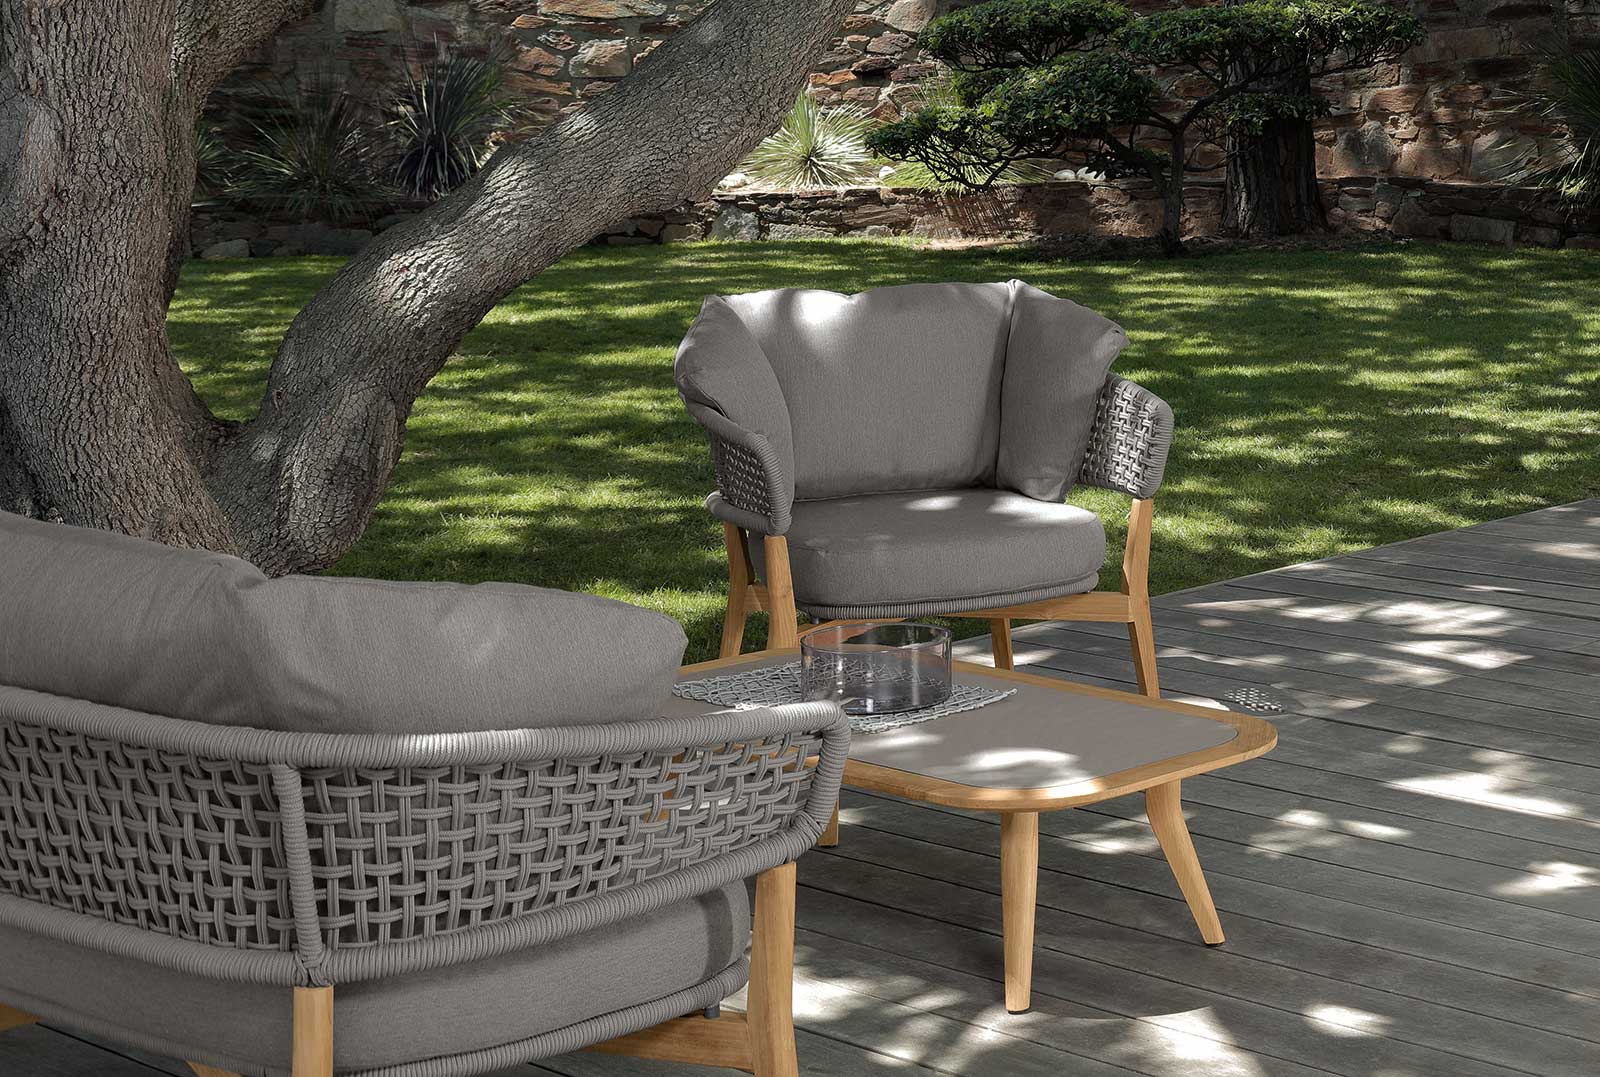 Luxurious outdoor lounge set in aluminium and teak signed by Cristian Visentin. Garden sofa, armchairs and coffee table. Shop online, free shipping.